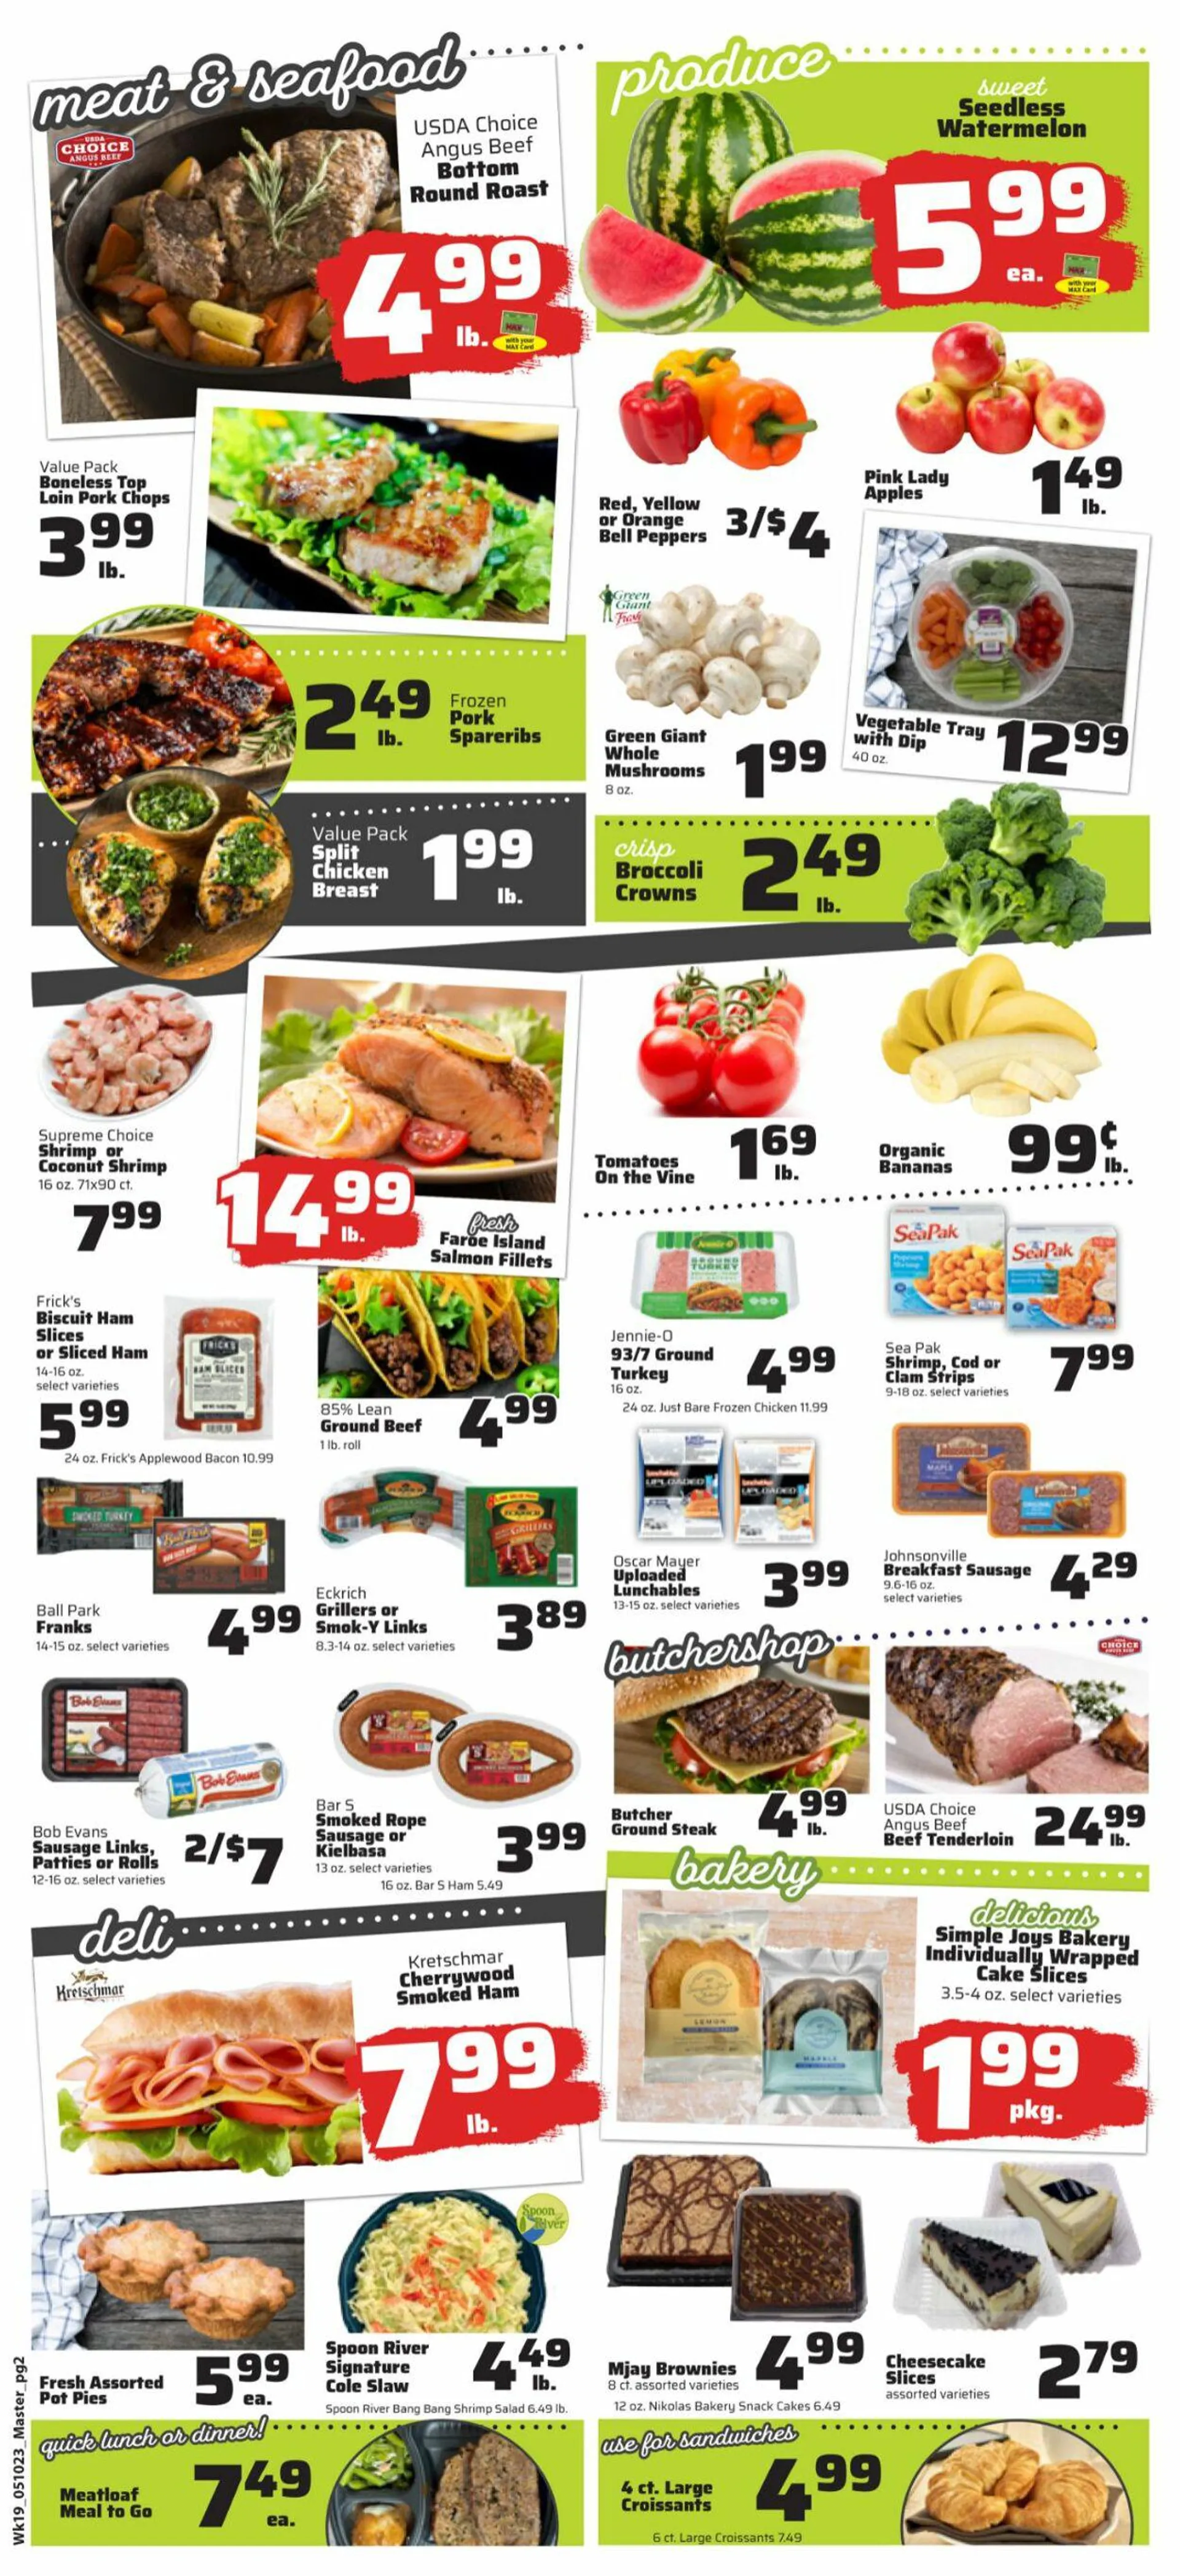 County Market Current weekly ad - 2